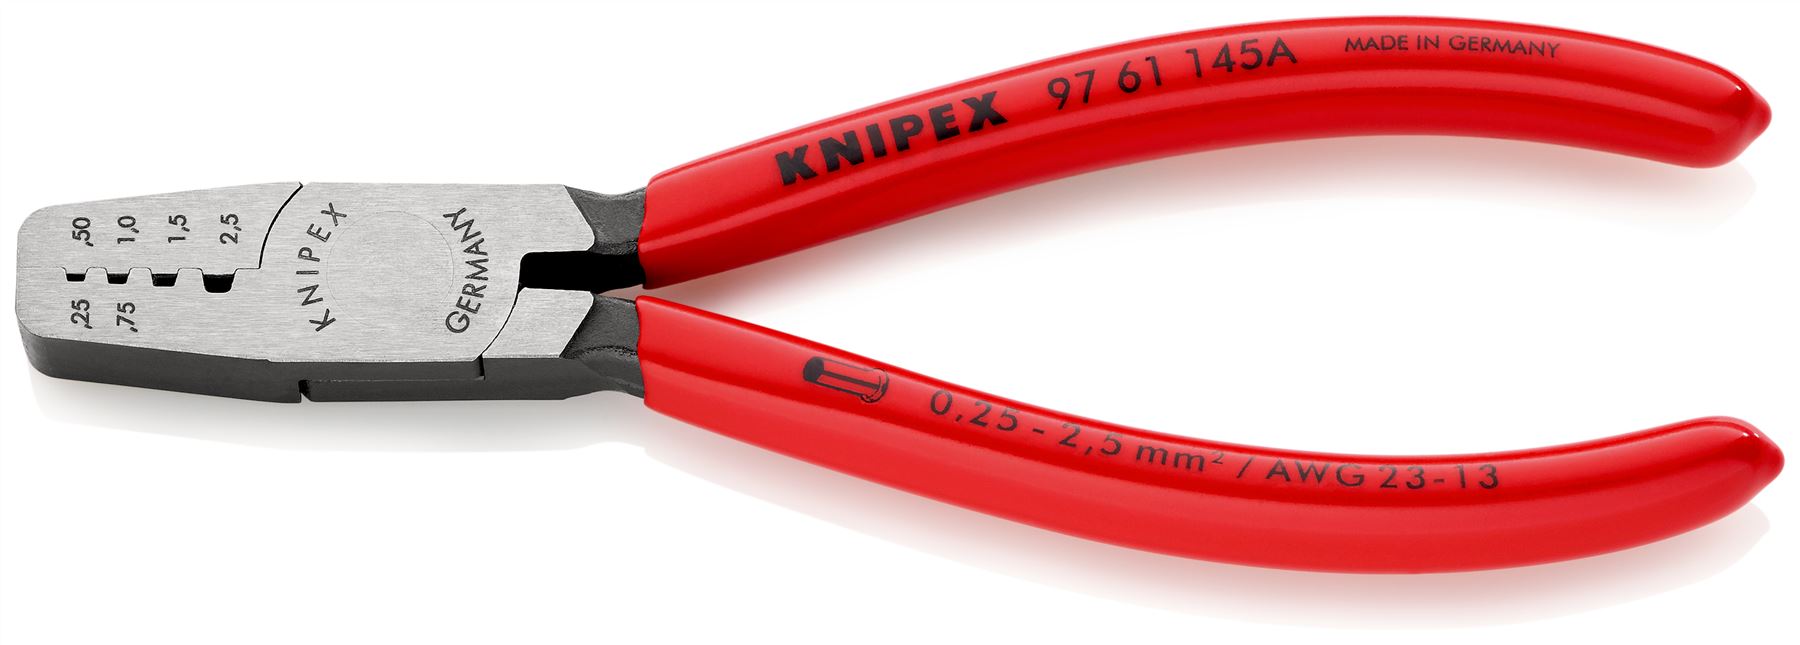 KNIPEX Crimping Pliers for Wire Ferrules 145mm 0.25-2.5mm² 145mm Plastic Coated Handles 97 61 145 A